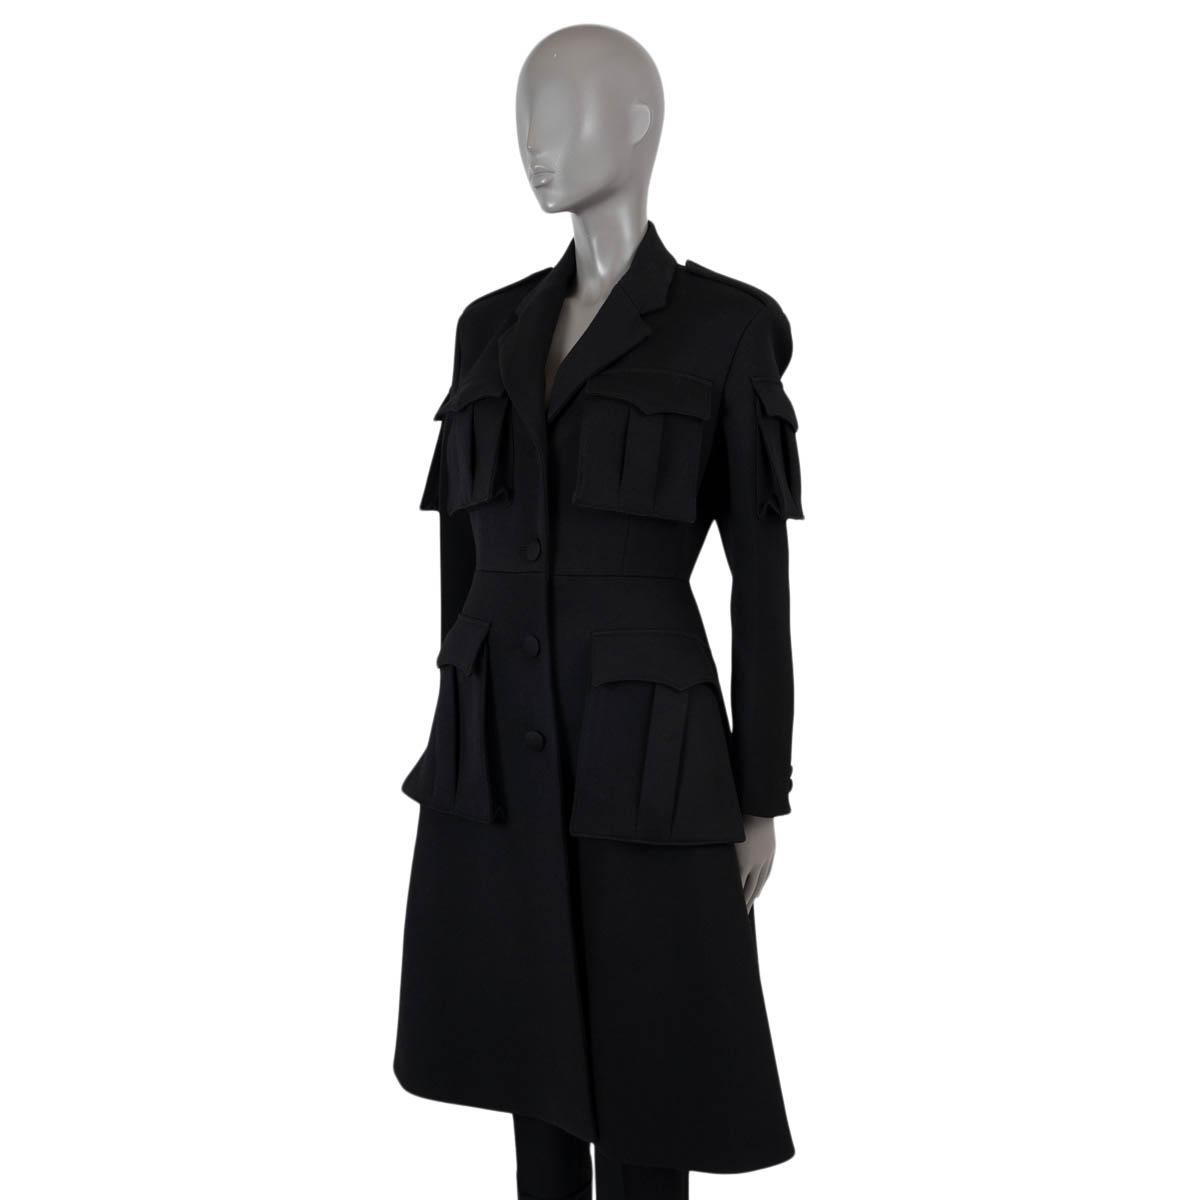 100% authentic Prada gaberdine coat in black wool (100%). Features a tailored silhouette, notch lapels, epaulettes, four flap pockets on the front and two on the sleeves. Closes with buttons on the front and is lined in. Has been worn and is in